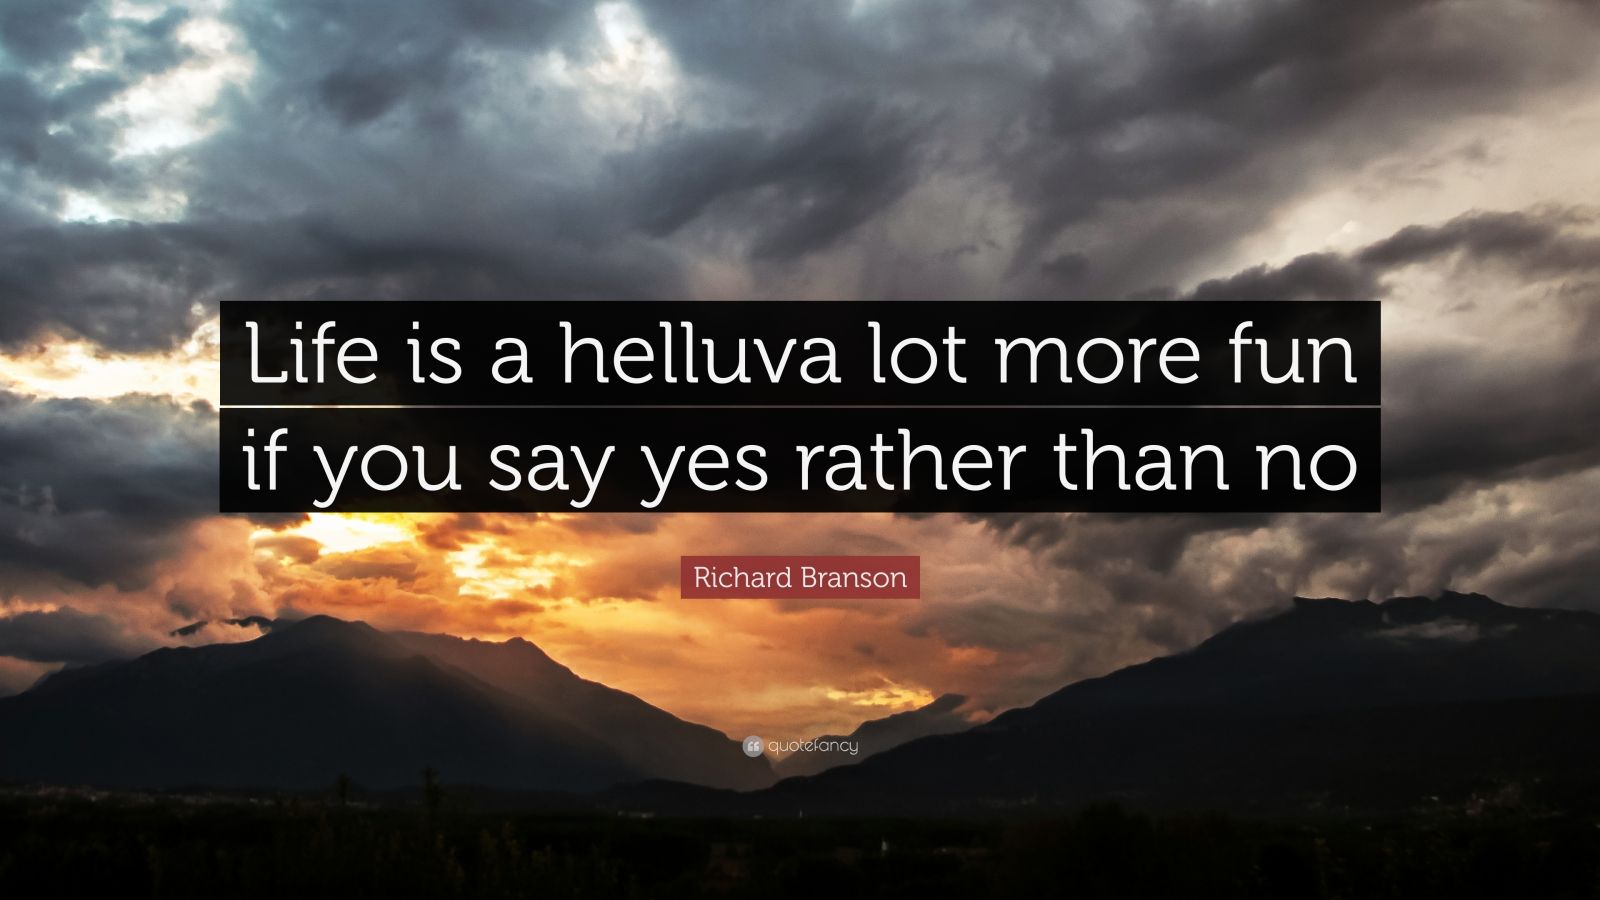 Richard Branson Quote: "Life is a helluva lot more fun if ...